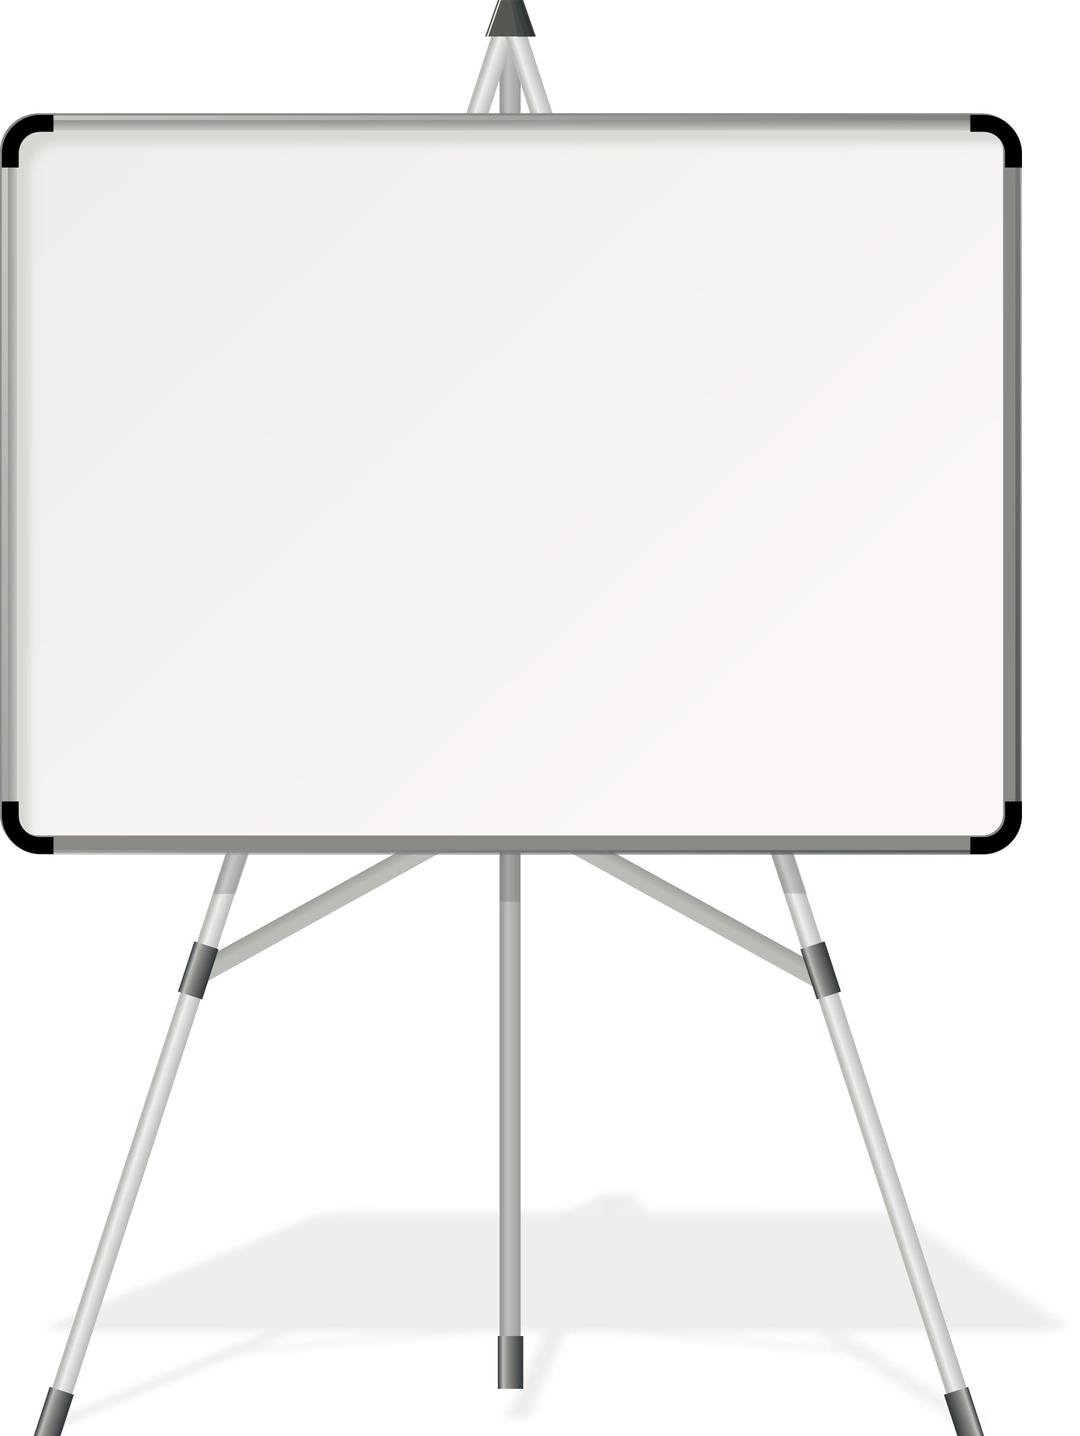 white board png transparent